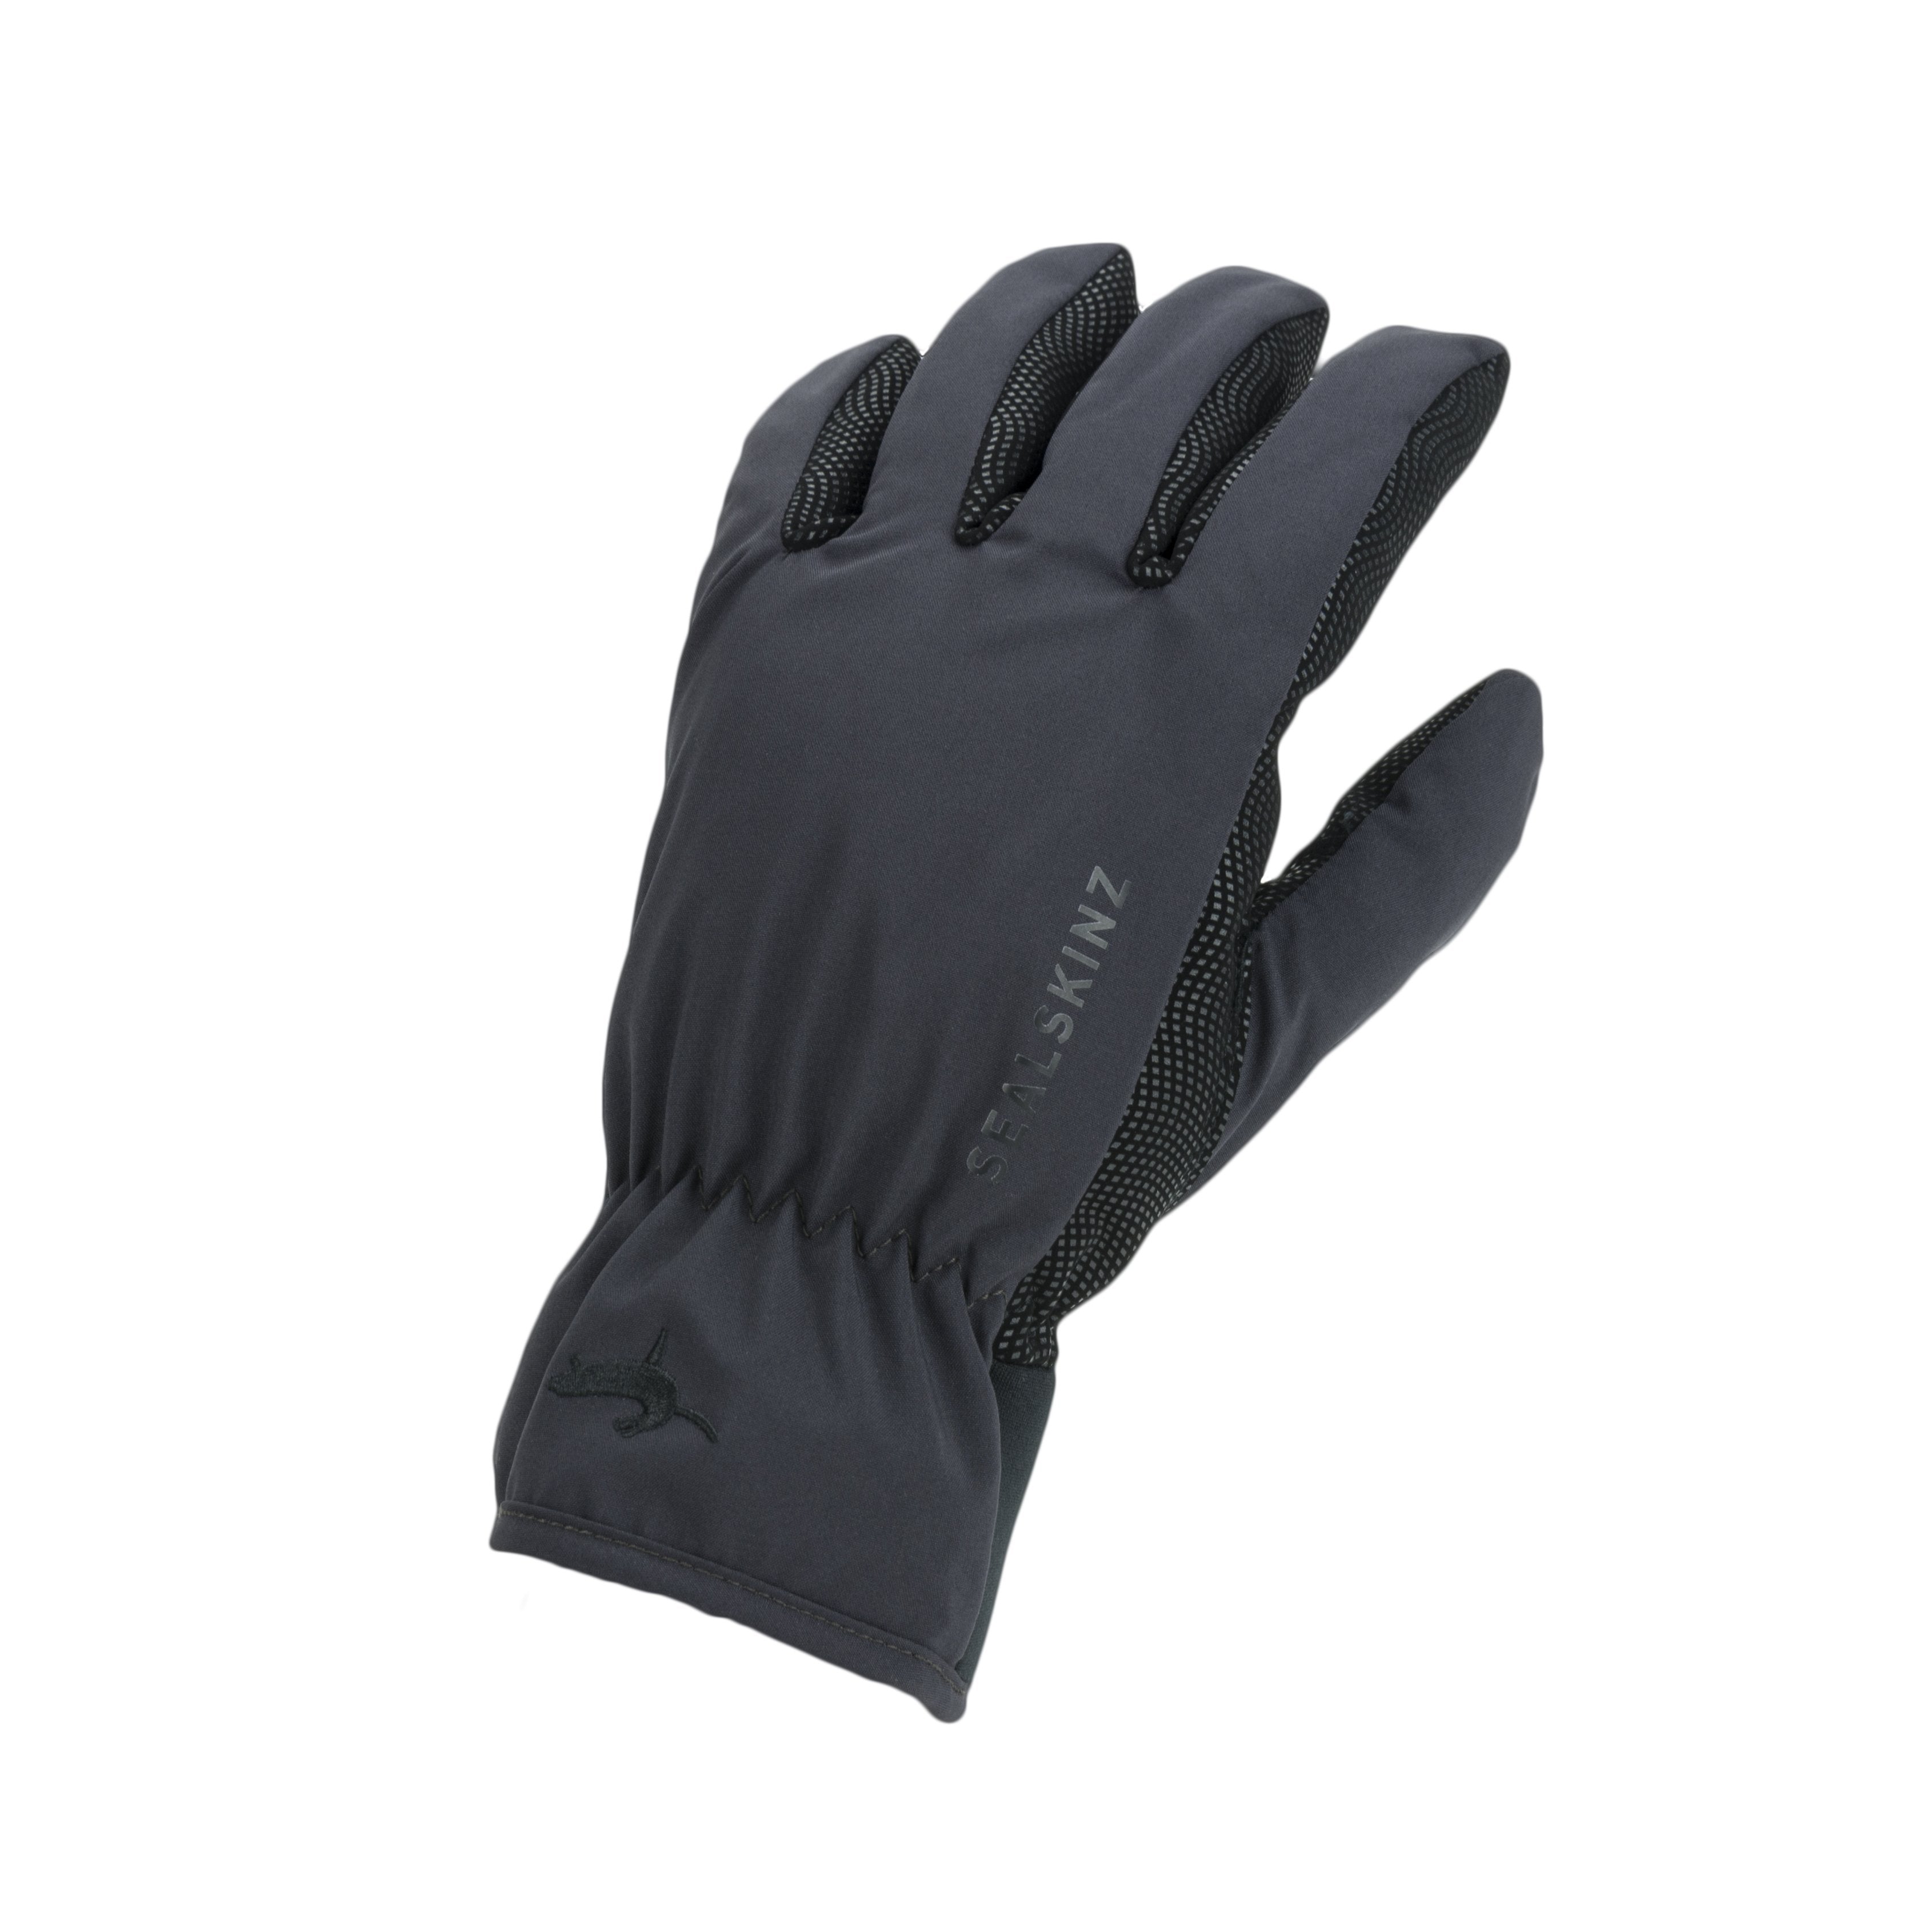 Winter Fishing Gloves With Finger Holes Waterproof Windproof